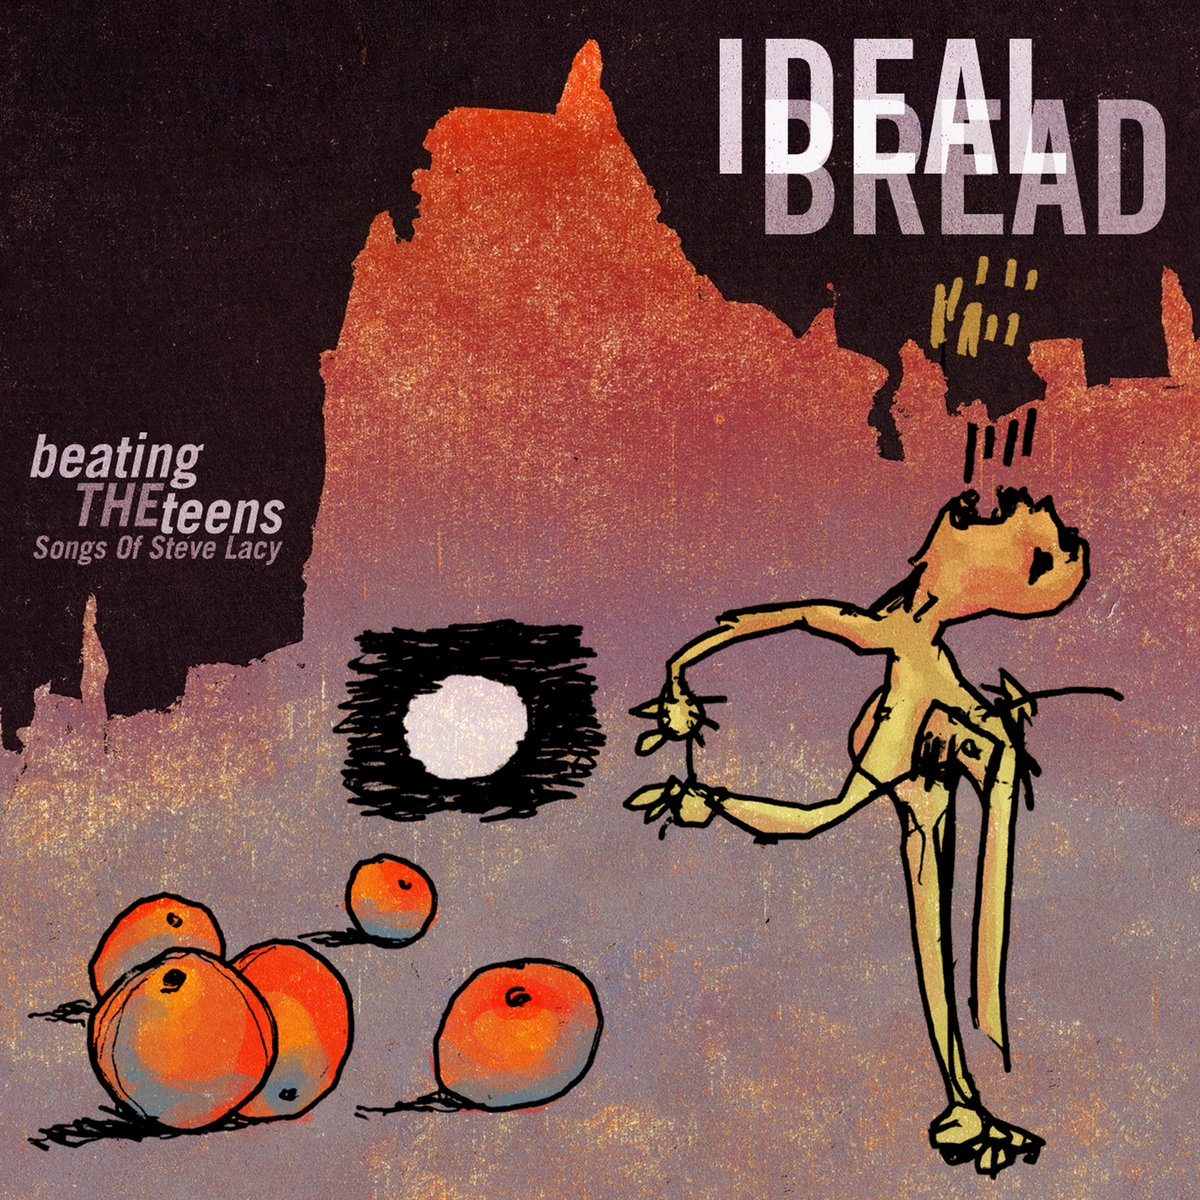 Ideal Bread - Beating the Teens